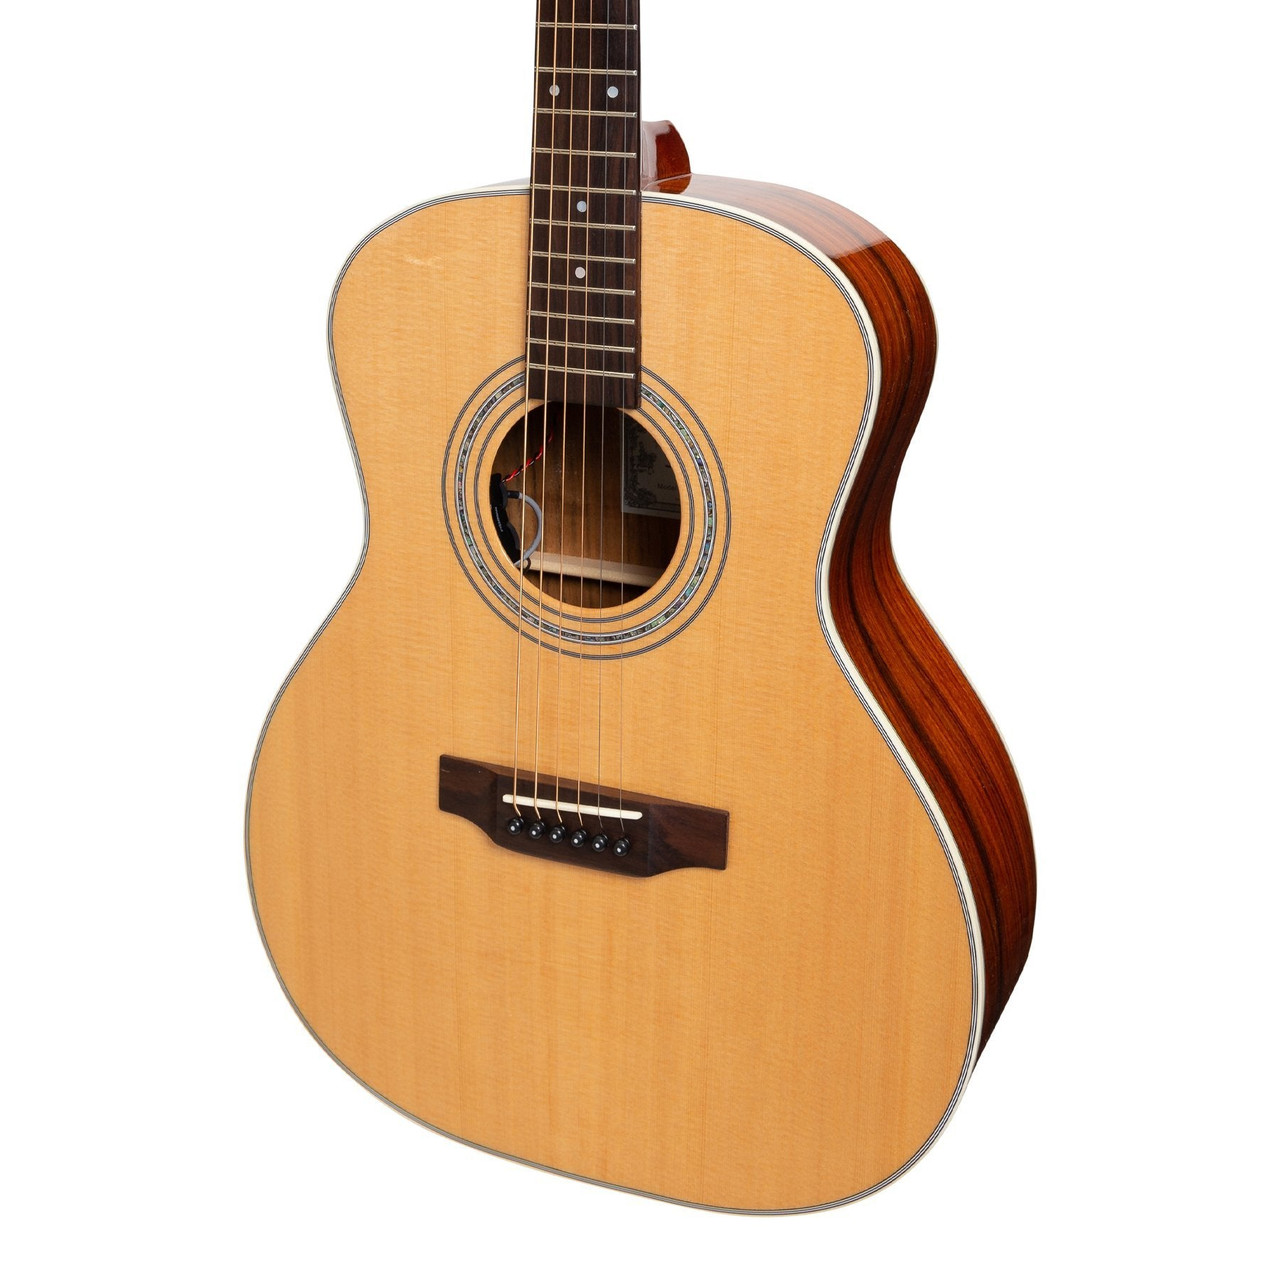 Saga '850 Series' Solid Spruce Top Acoustic-Electric Small-Body Guitar (Natural Gloss)